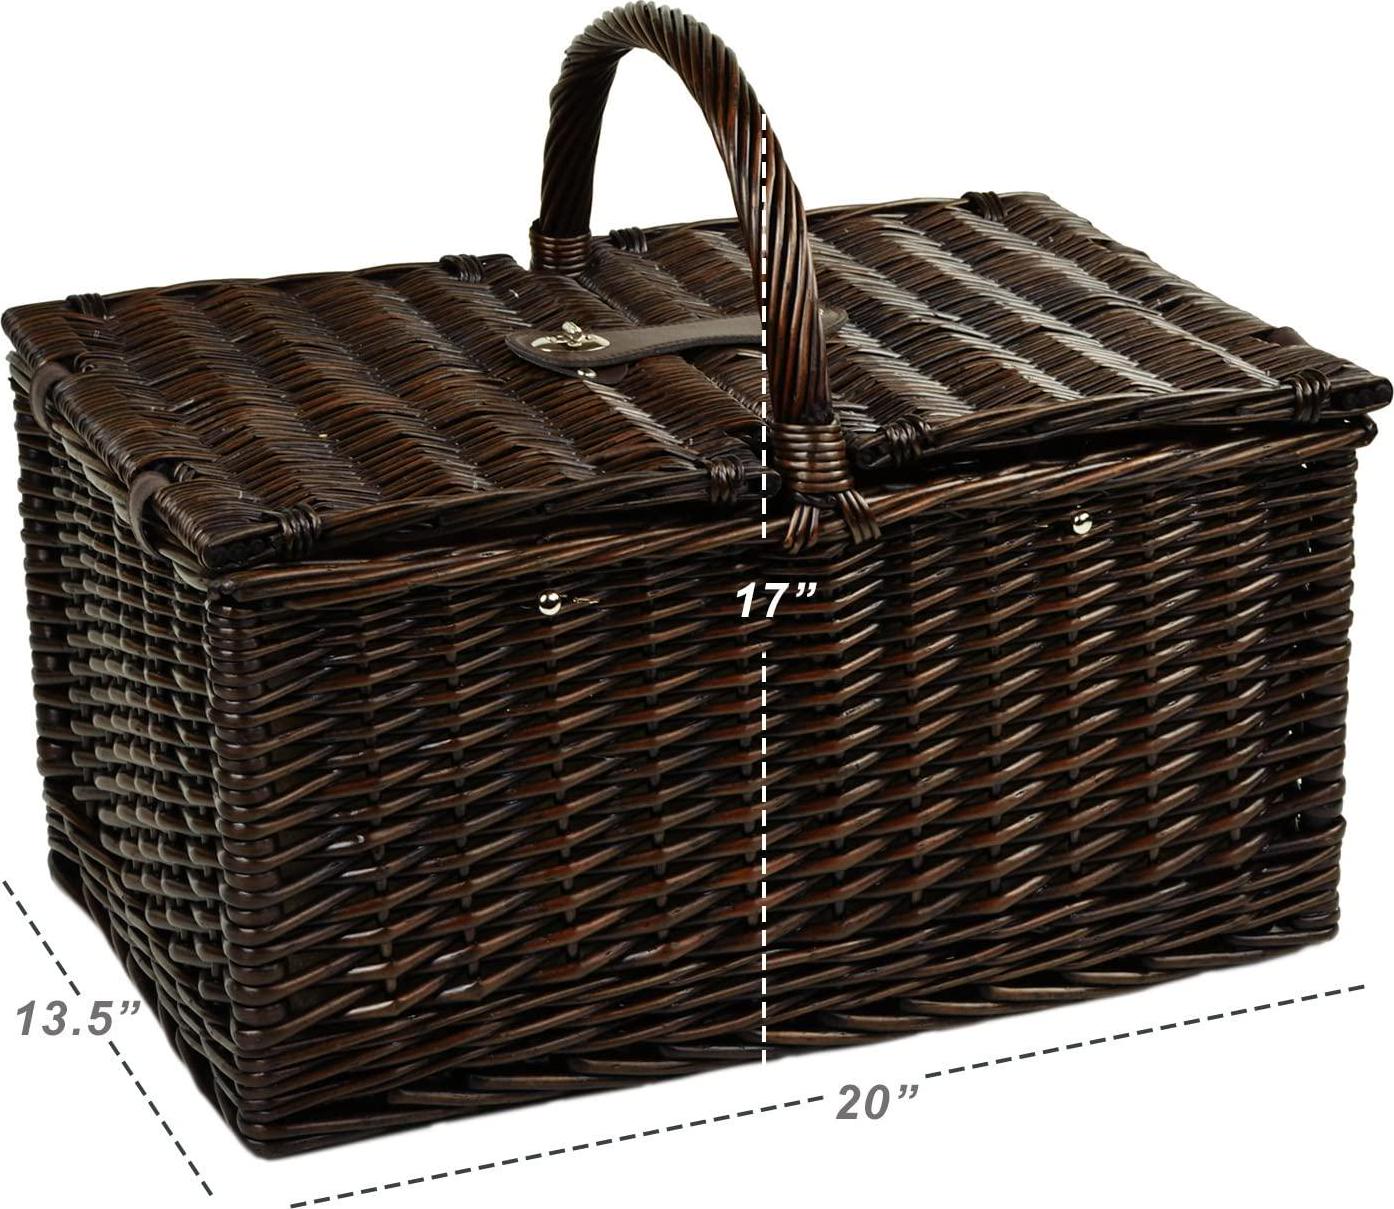 Picnic at Ascot Surrey Willow Picnic Basket With Blanket And Coffee Set, Brown Wicker/Diamond Orange